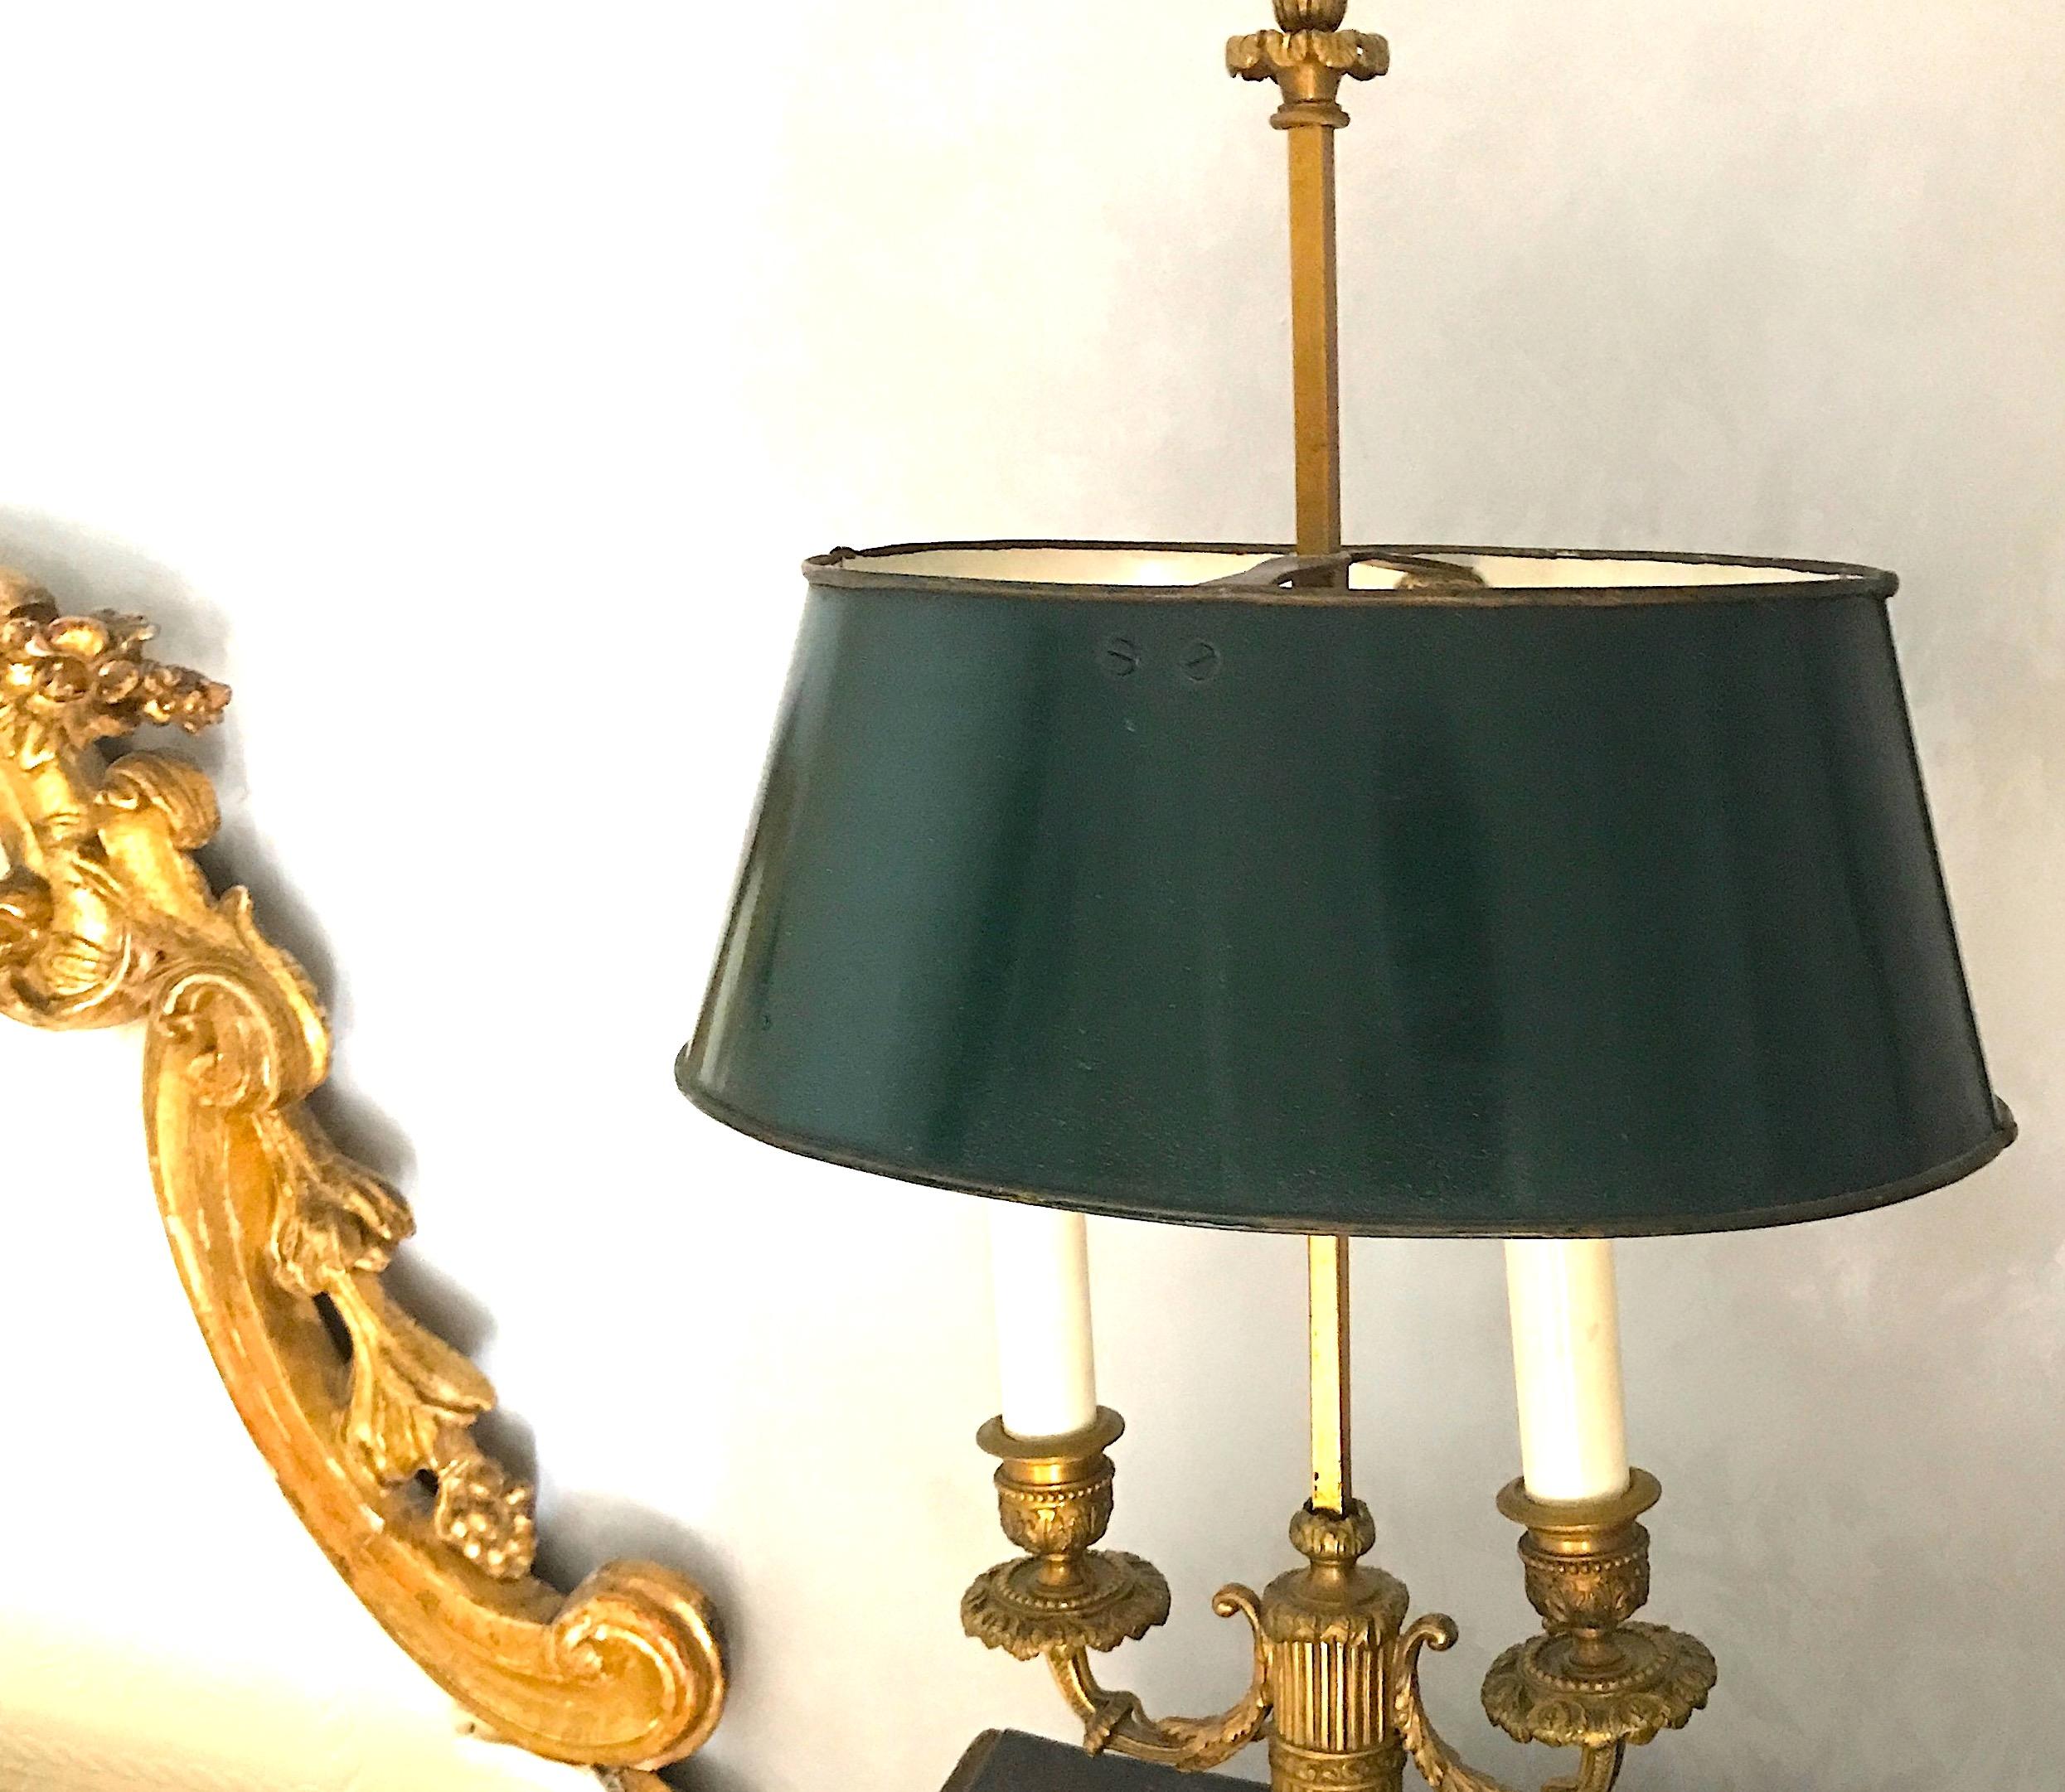 19th Century Pair of French Empire Gilt Bronze Two-Arm Bouillotte Lamps or Table Lamps, 1815